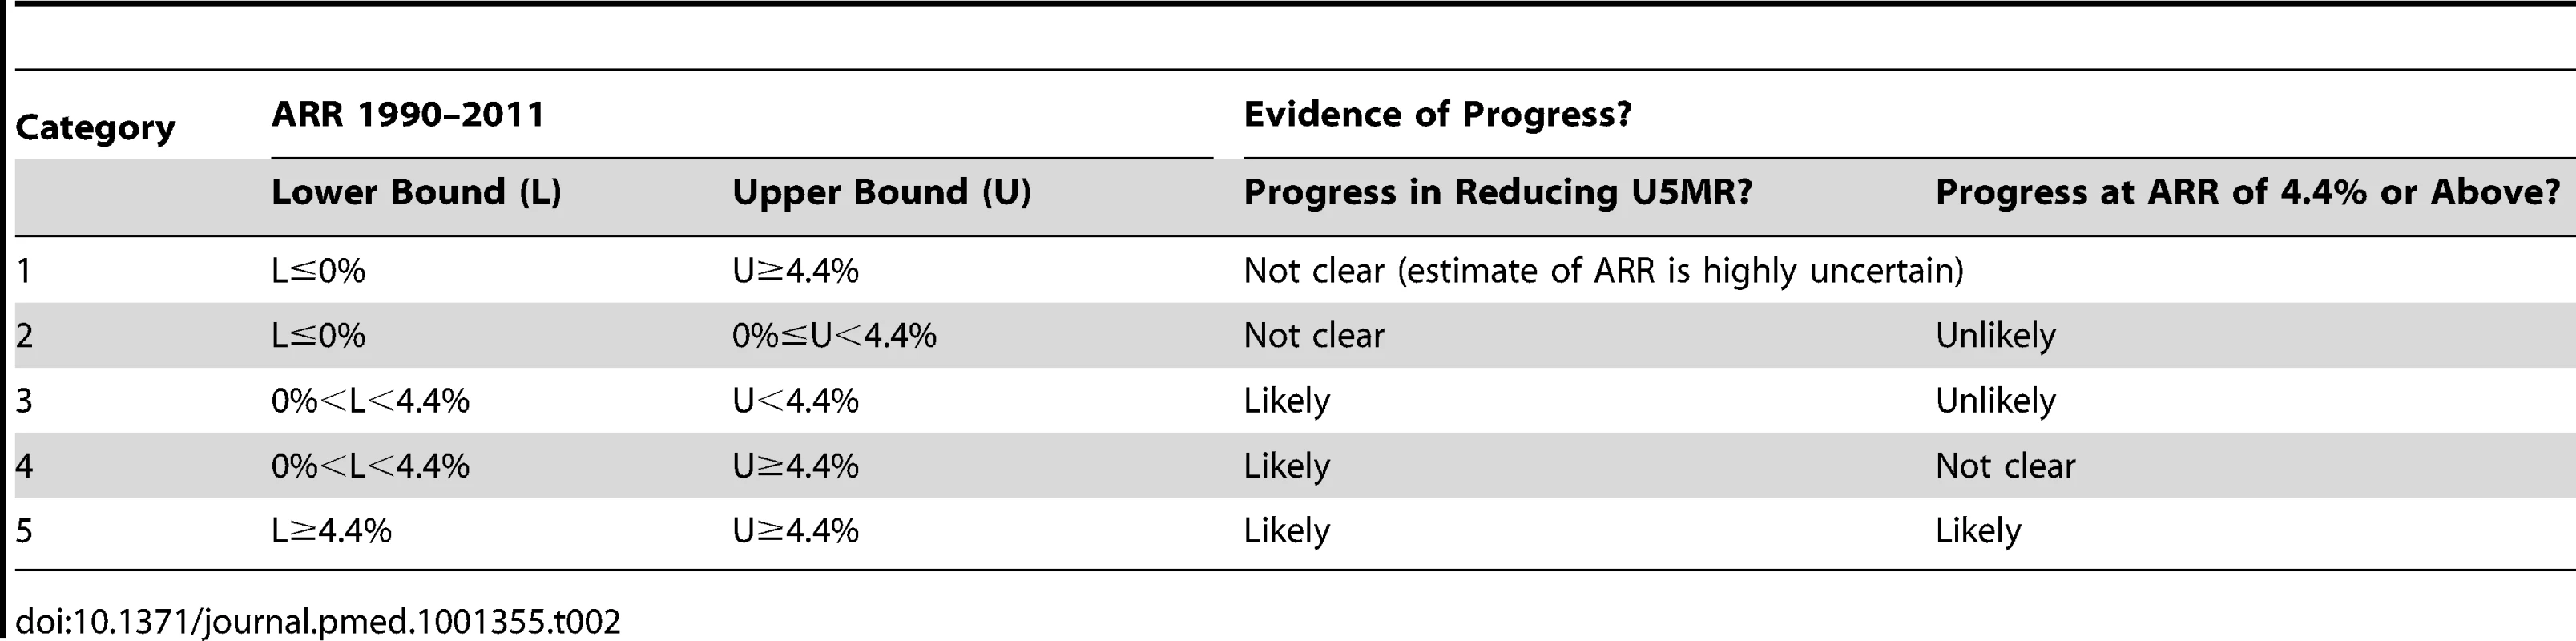 Categorization of countries based on evidence for progress in reducing U5MR and accomplishing the MDG 4 target of an ARR of 4.4% from 1990 to 2011.